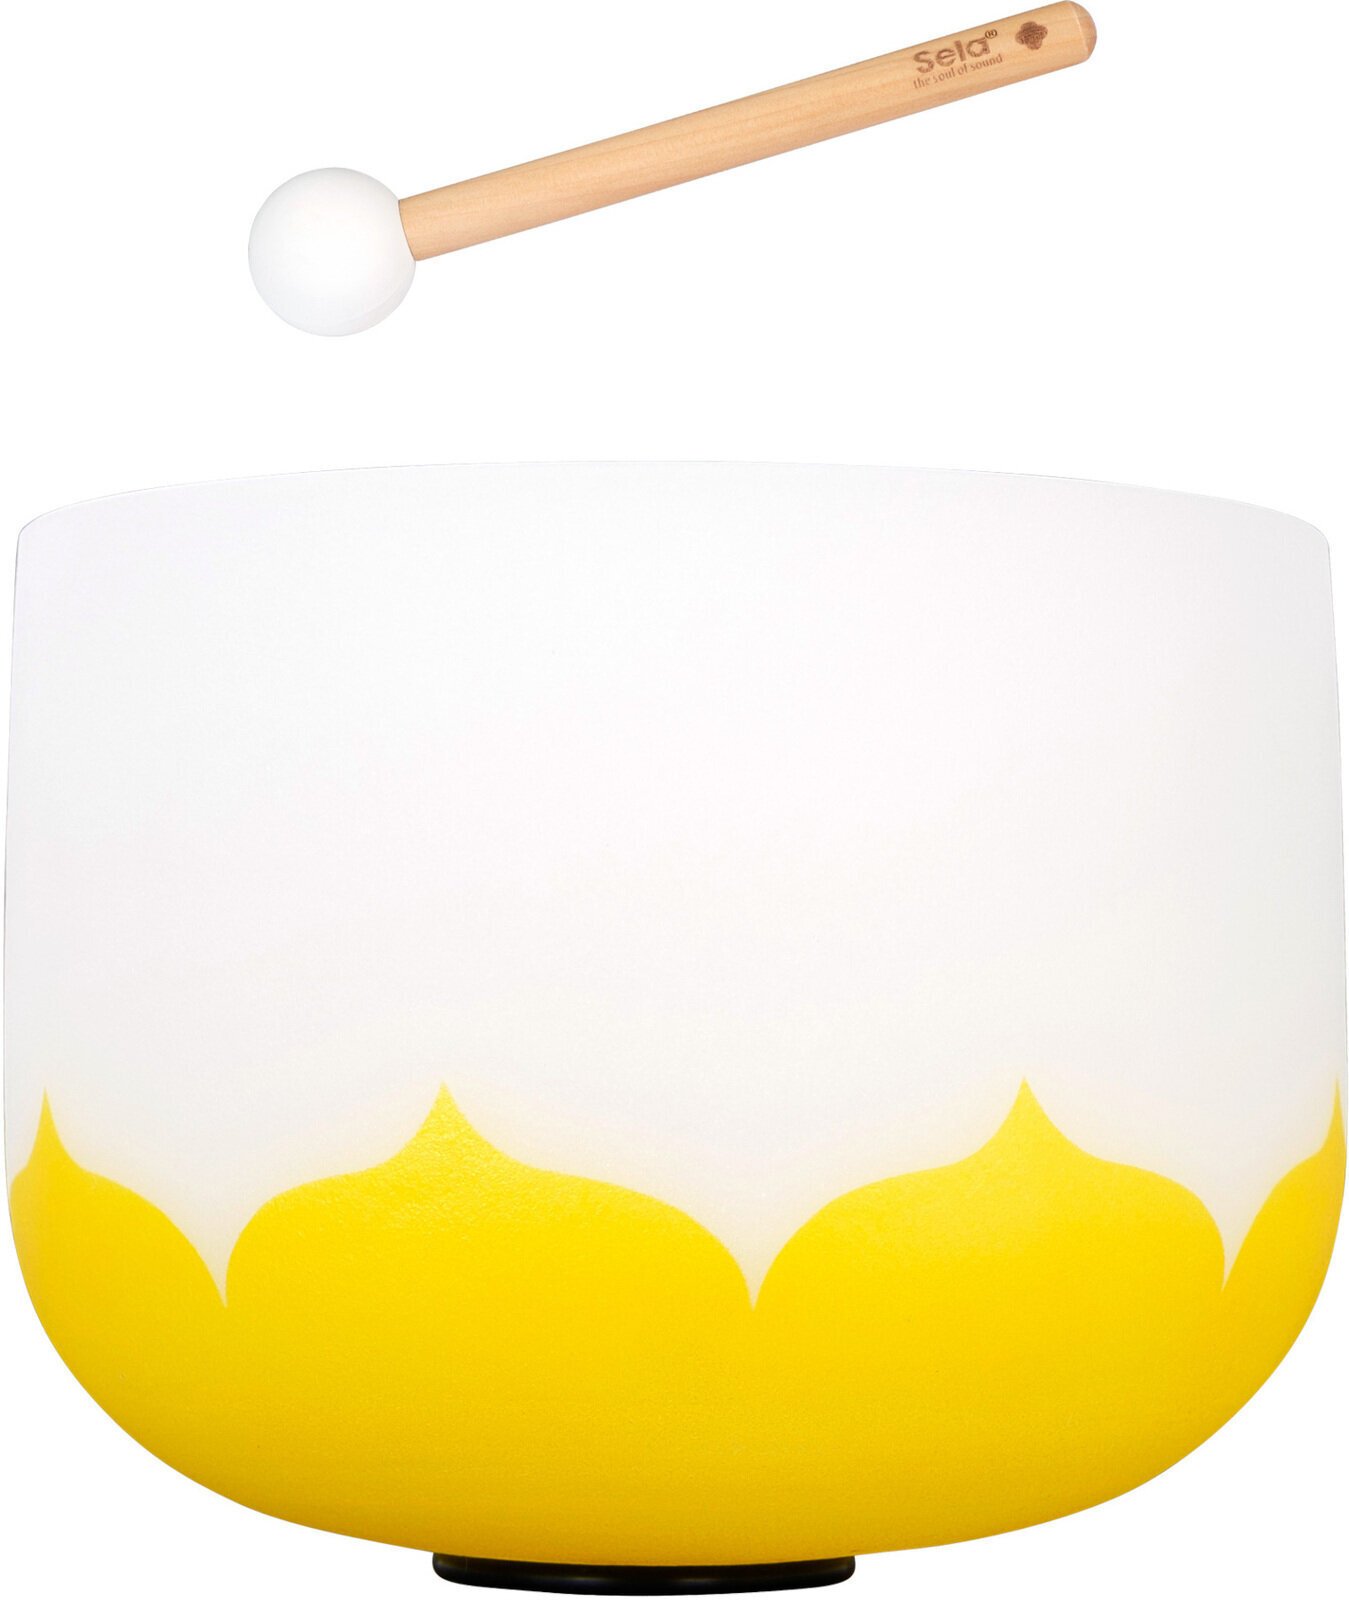 Percussion for music therapy Sela 10" Crystal Singing Bowl Lotus 432 Hz E - Yellow (Solar Plexus Chakra) incl. 1 Wood Mallet